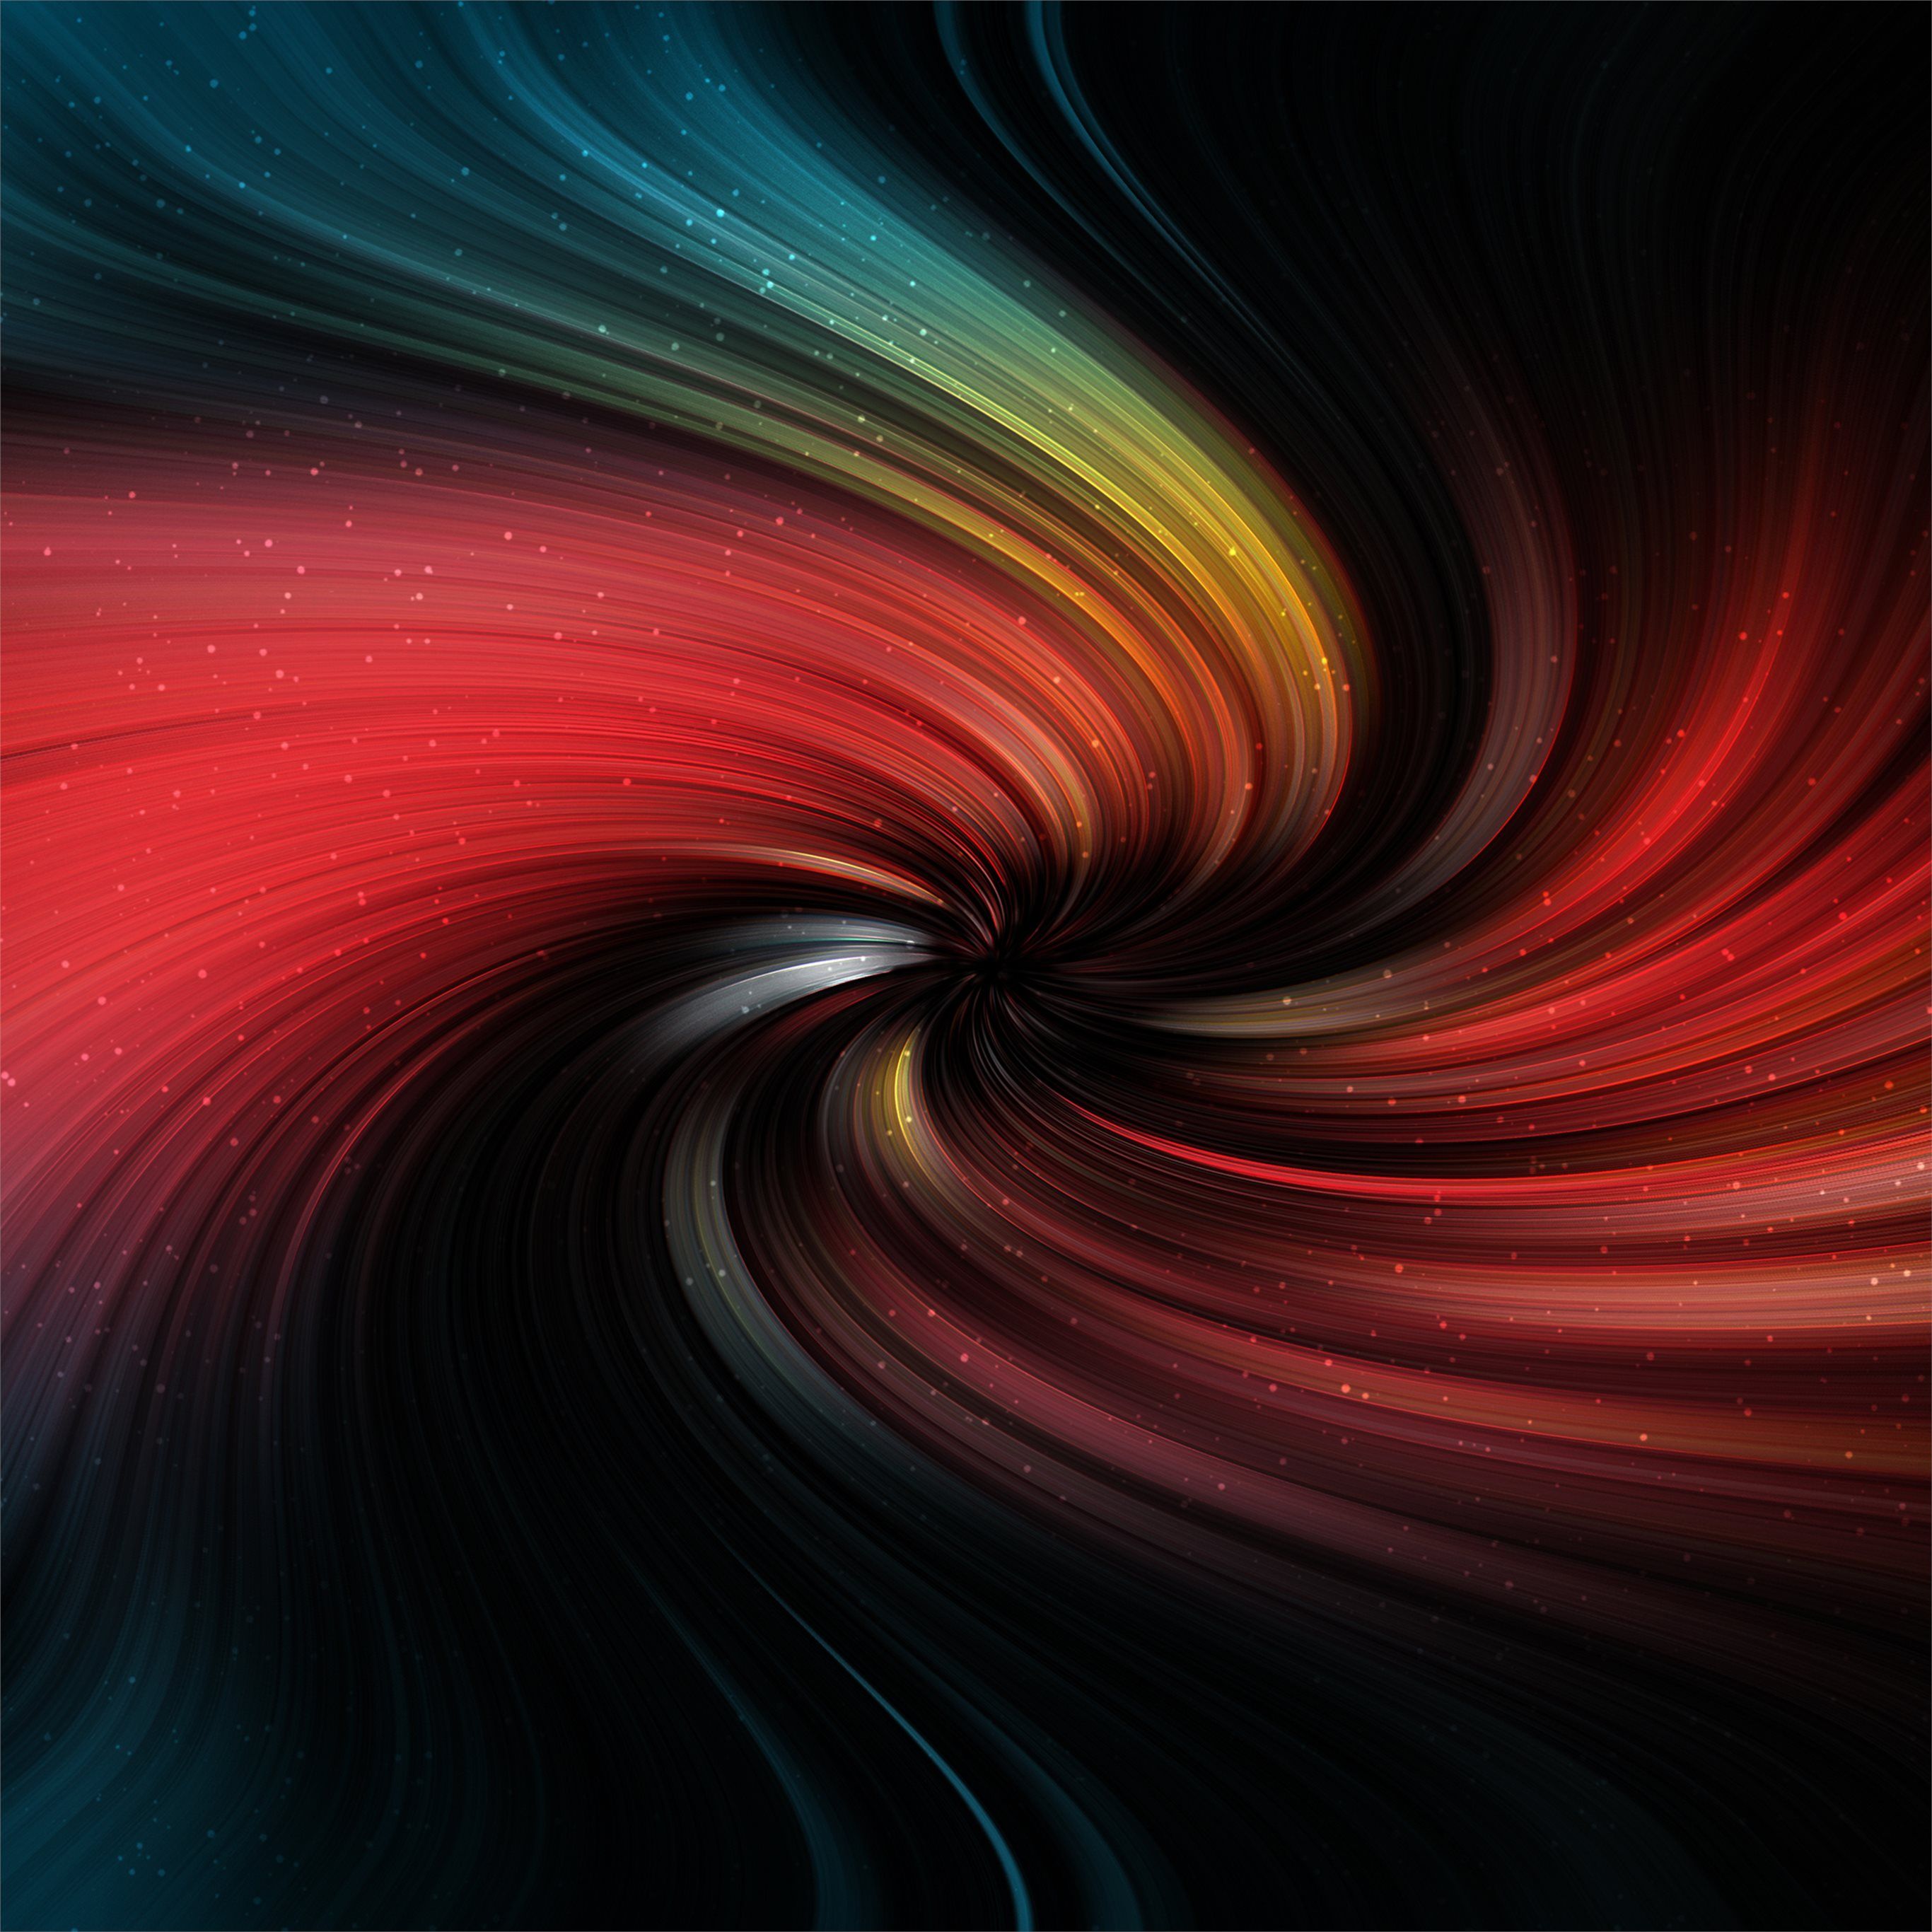 Red Swirl Wallpapers